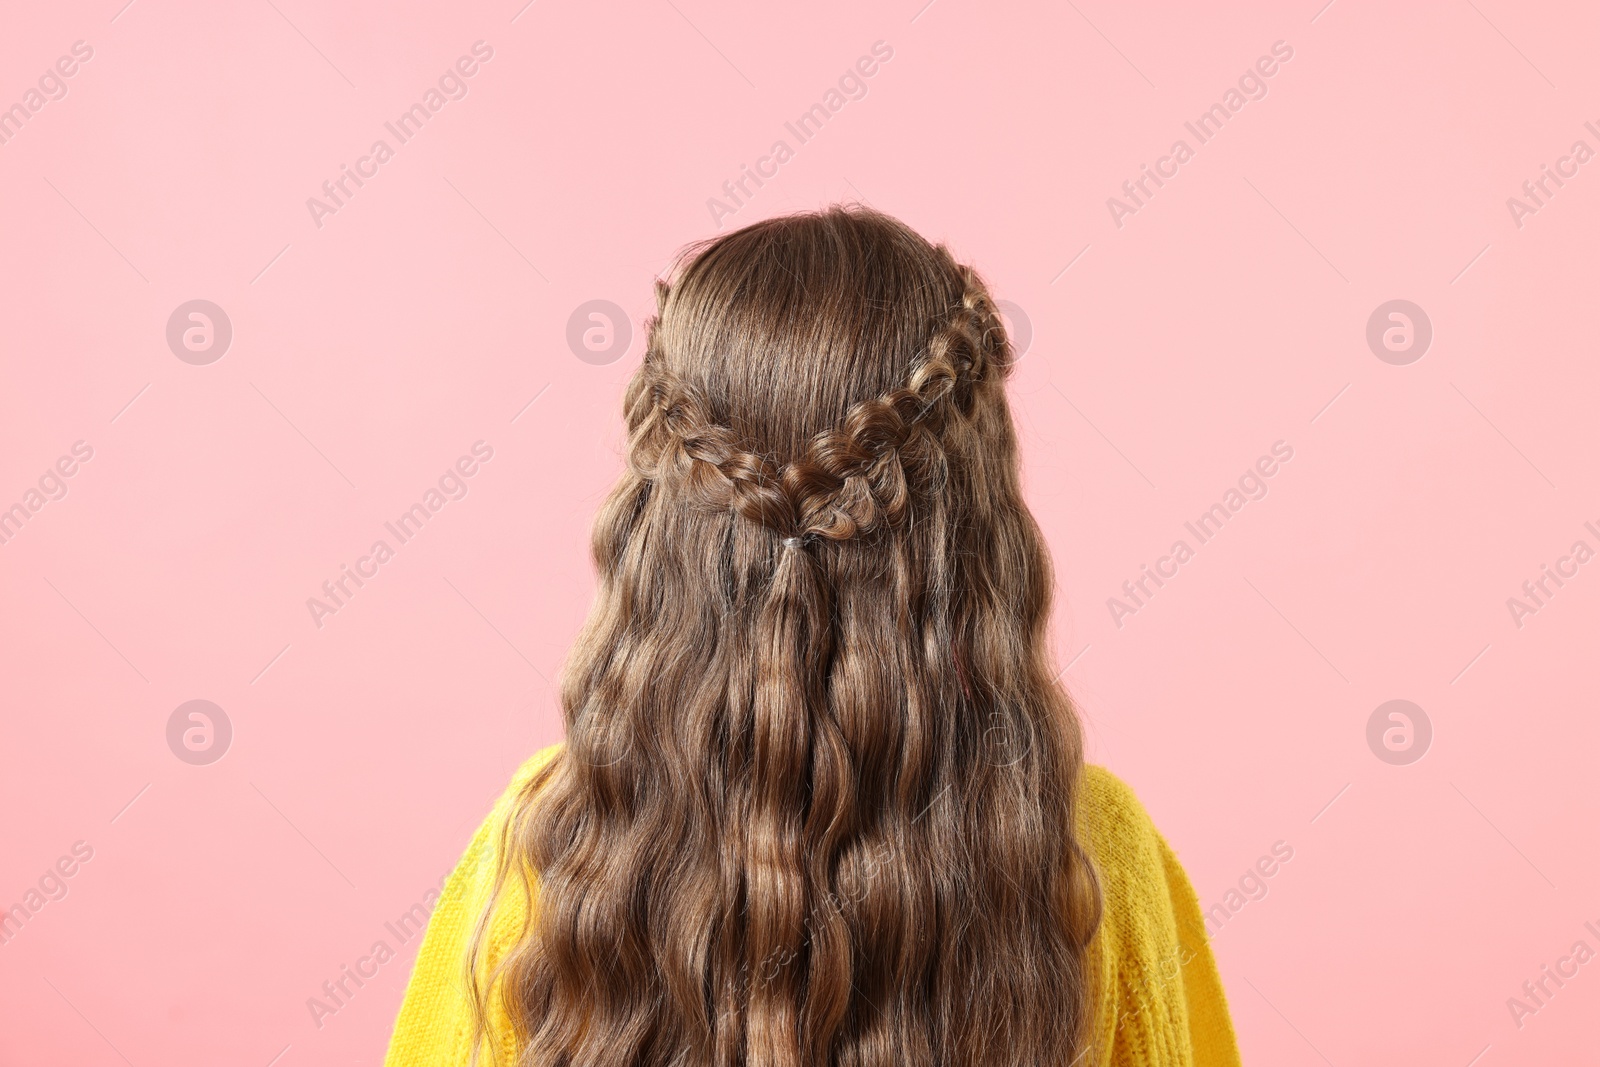 Photo of Little girl with braided hair on pink background, back view